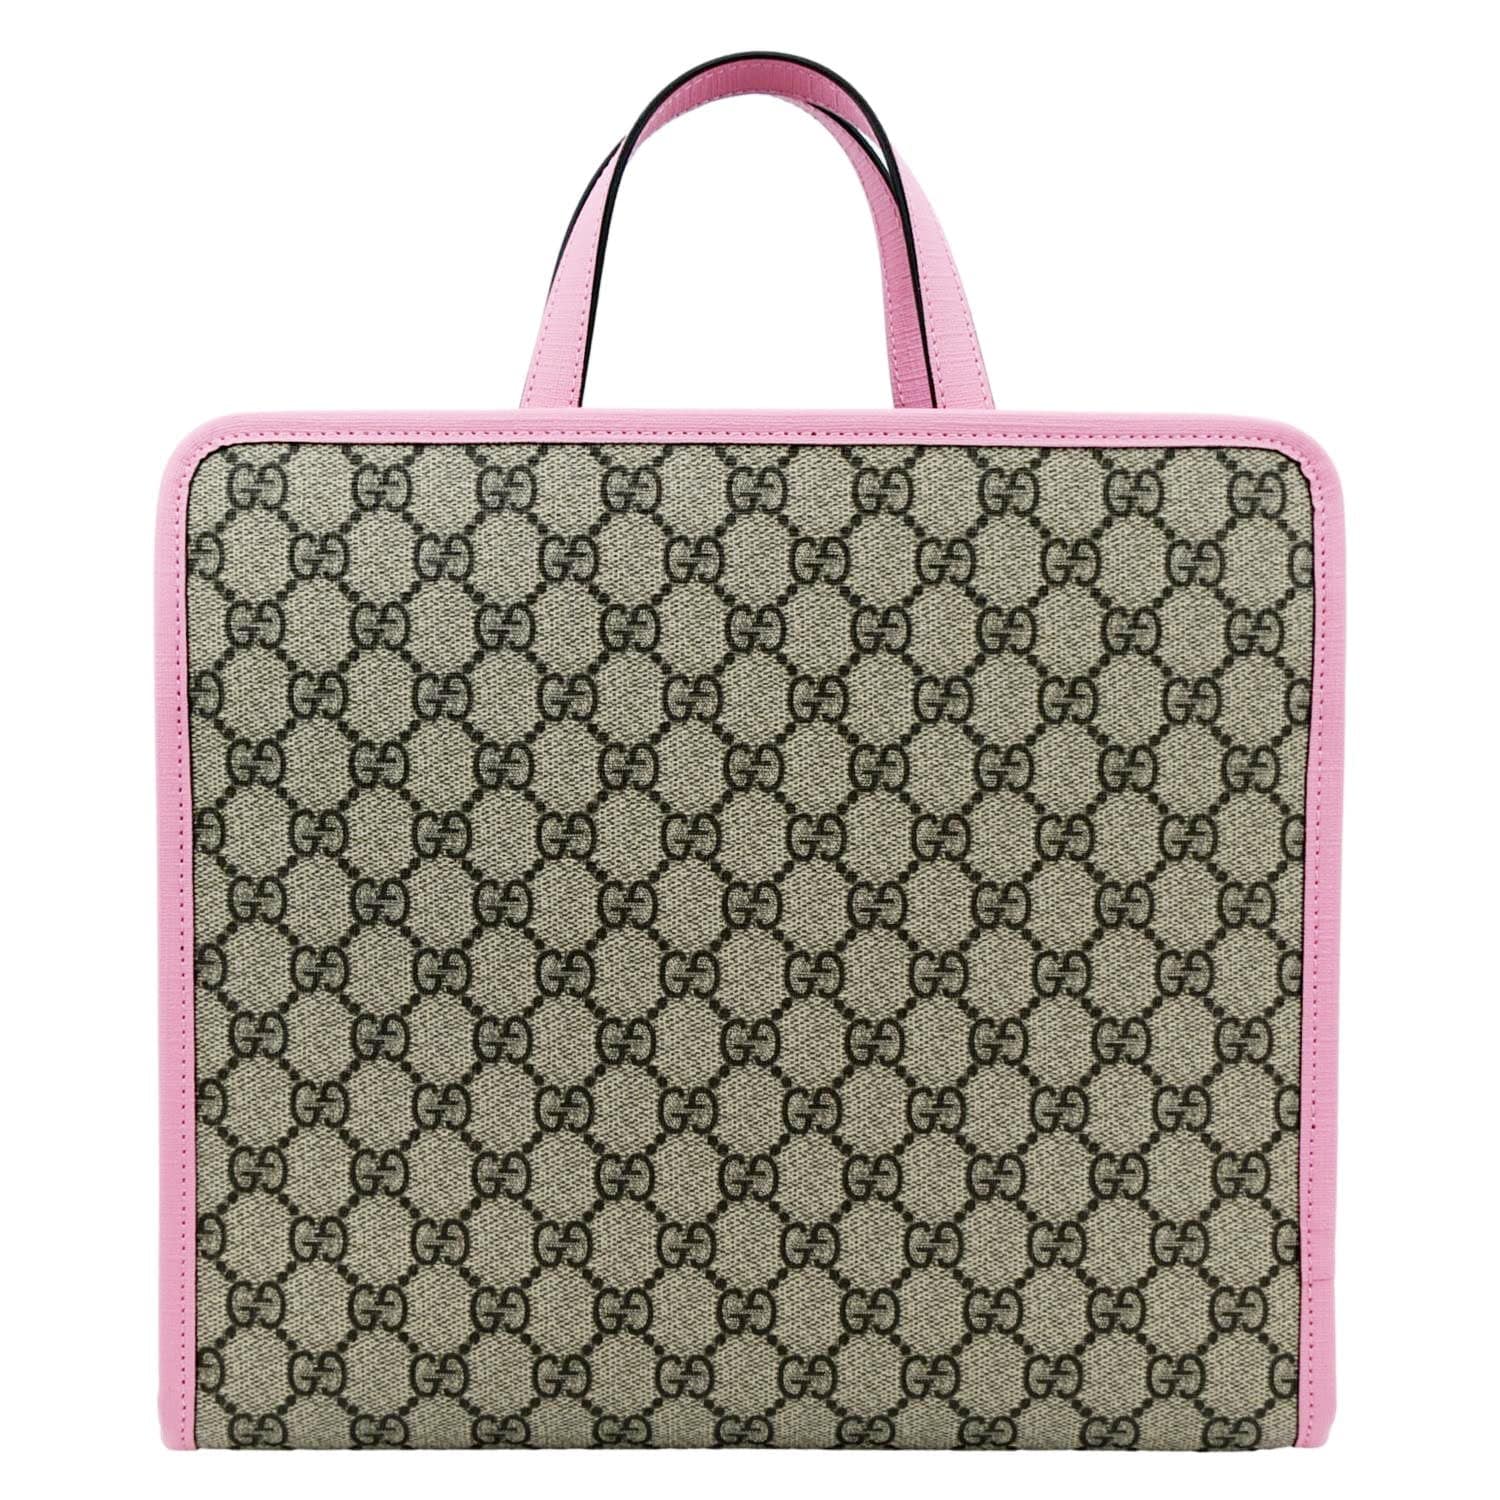 GG small duffle bag in pink canvas